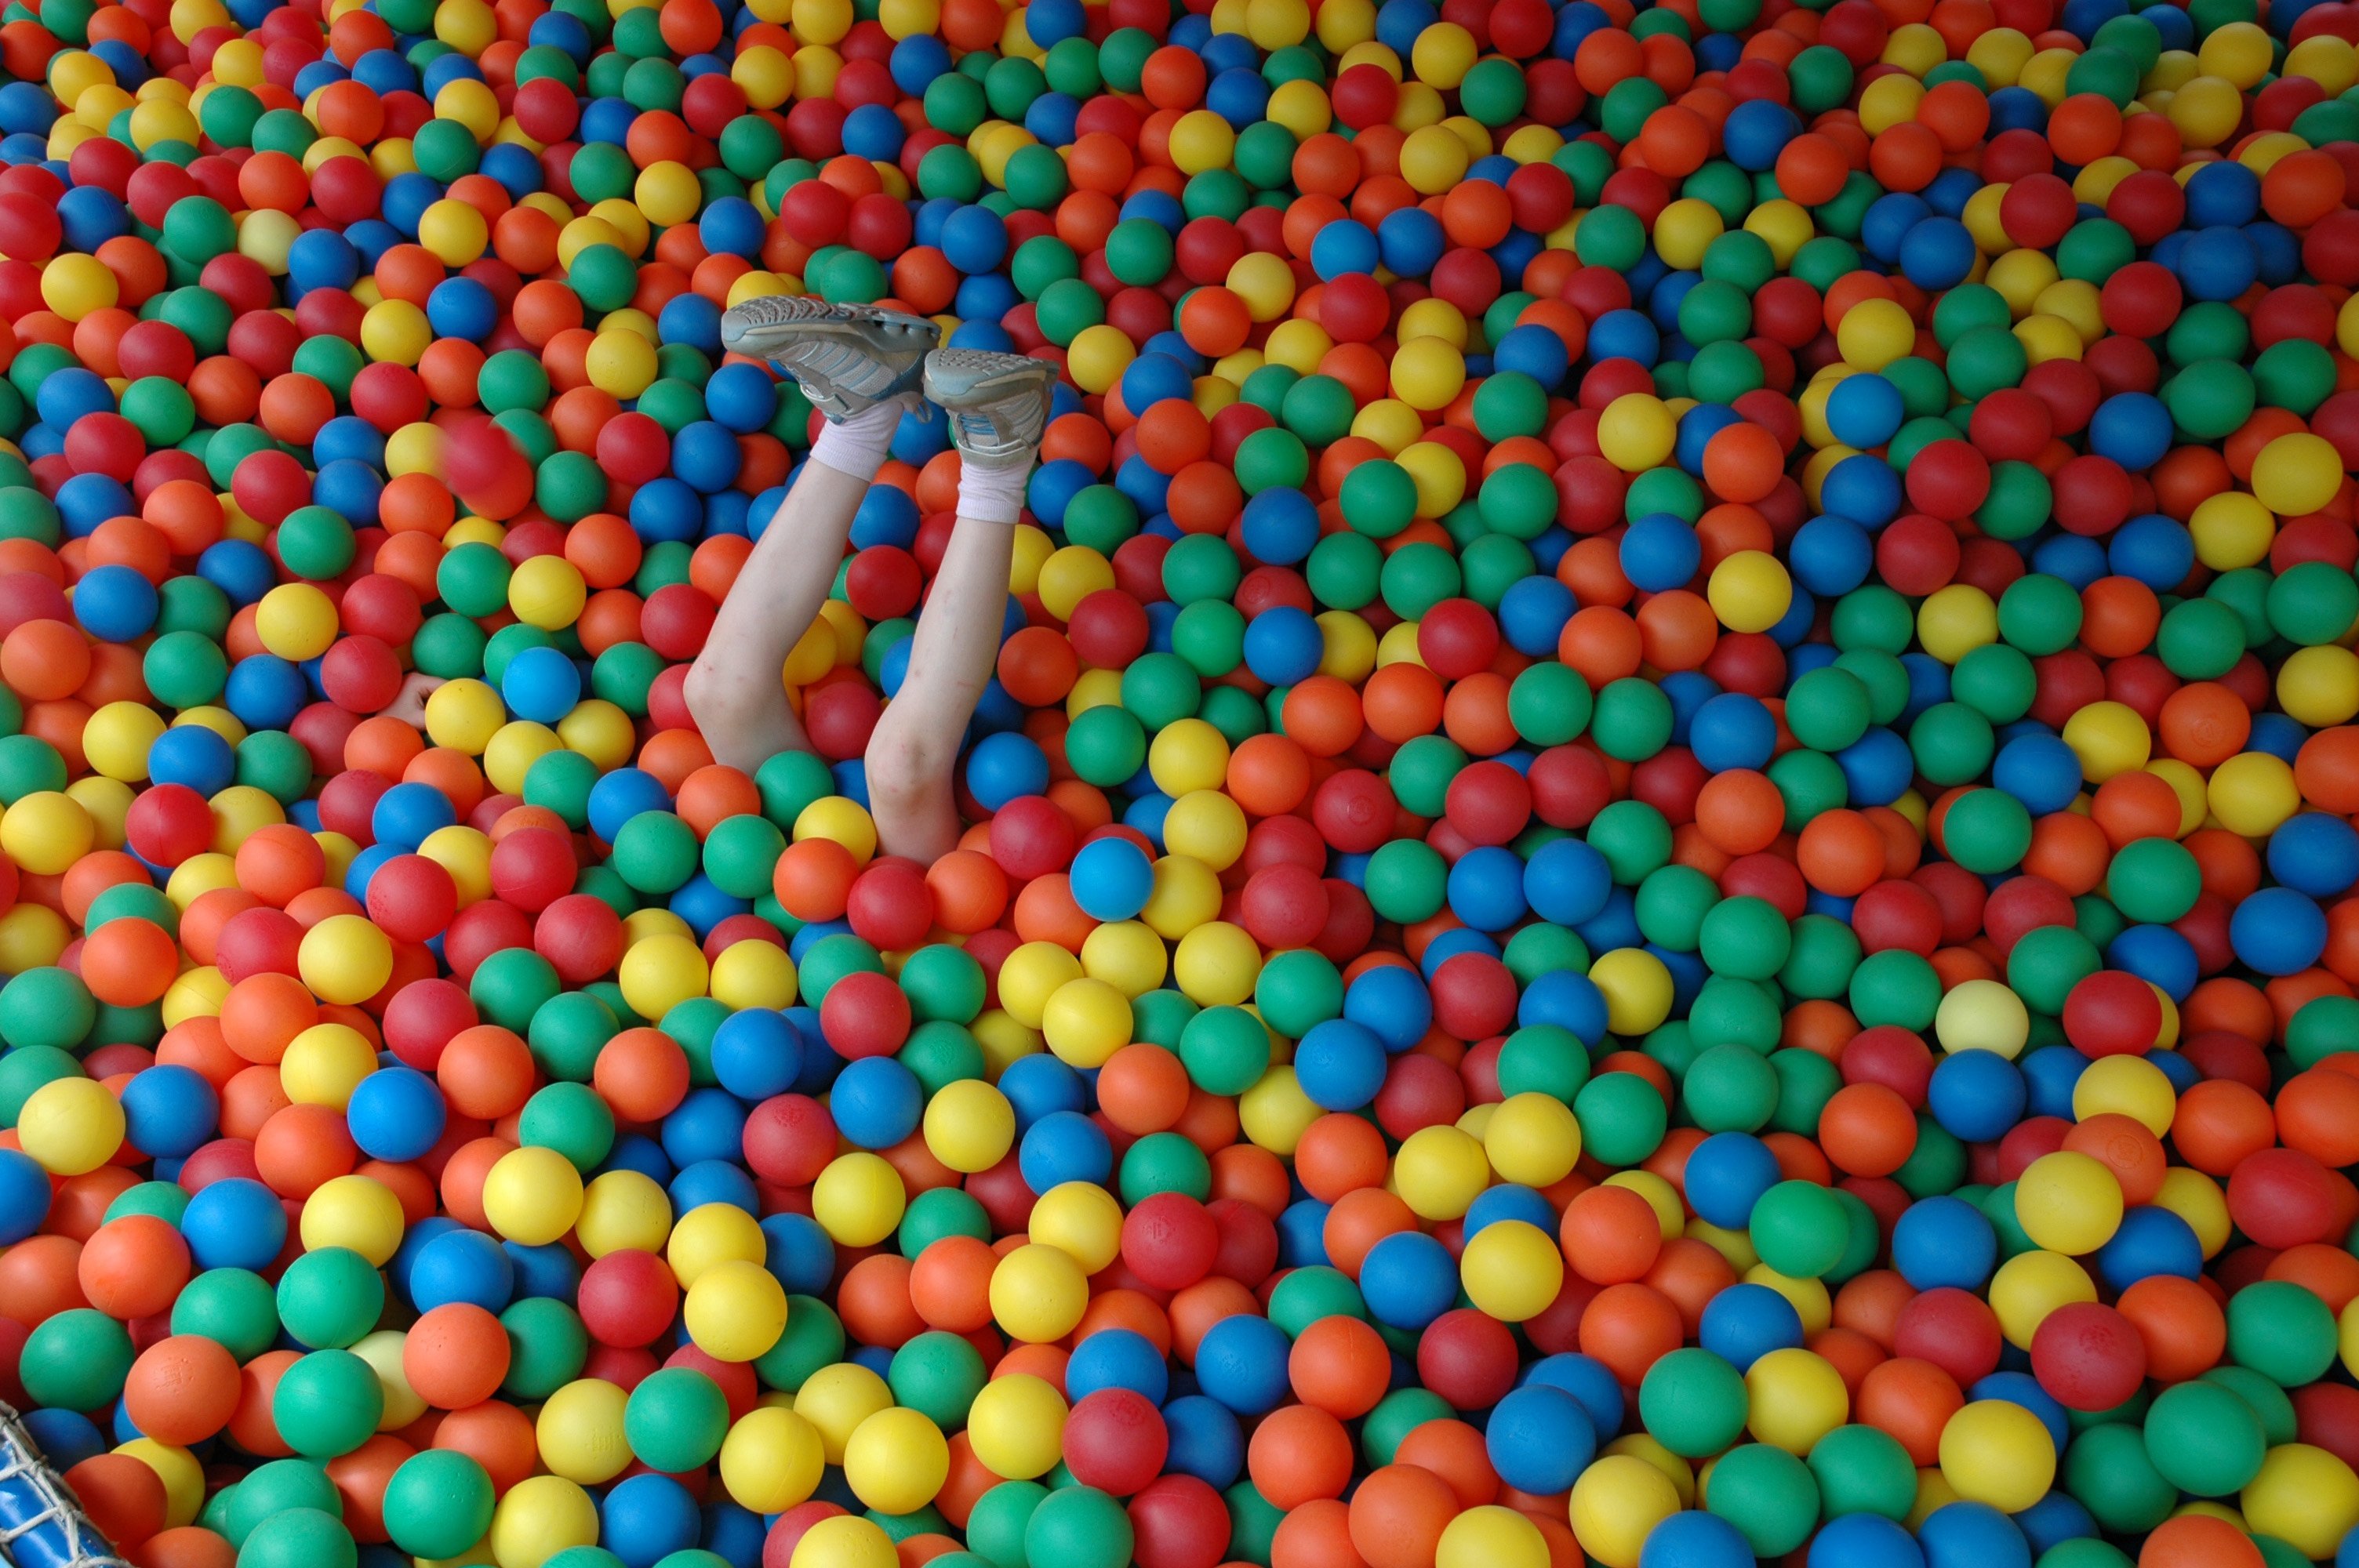 View of human legs amid colorful balls